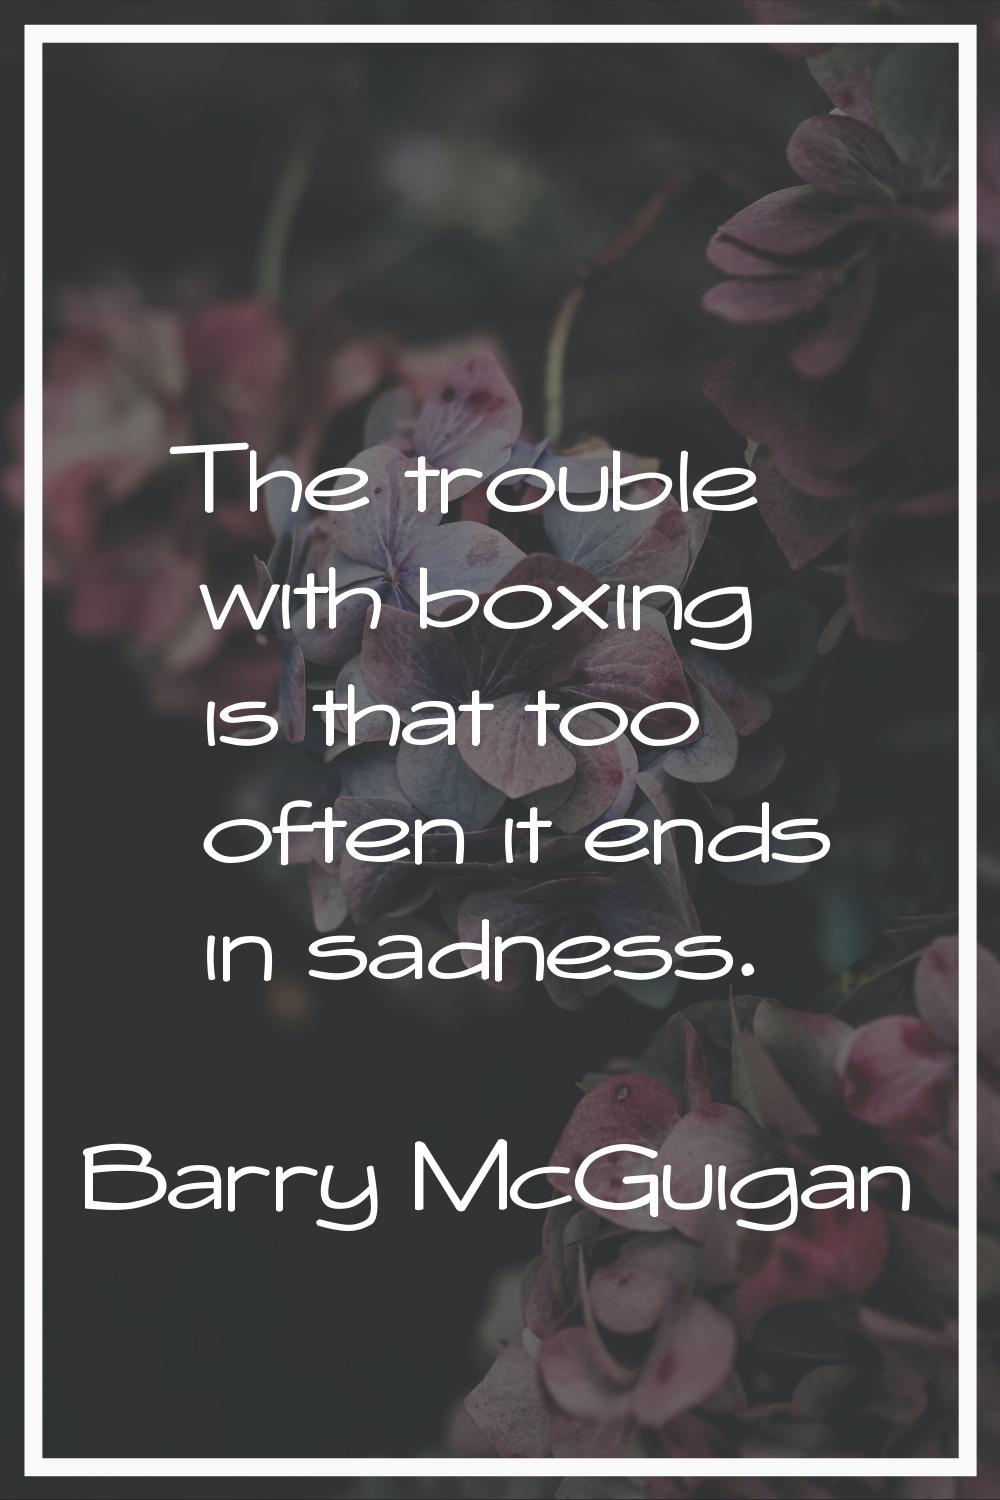 The trouble with boxing is that too often it ends in sadness.